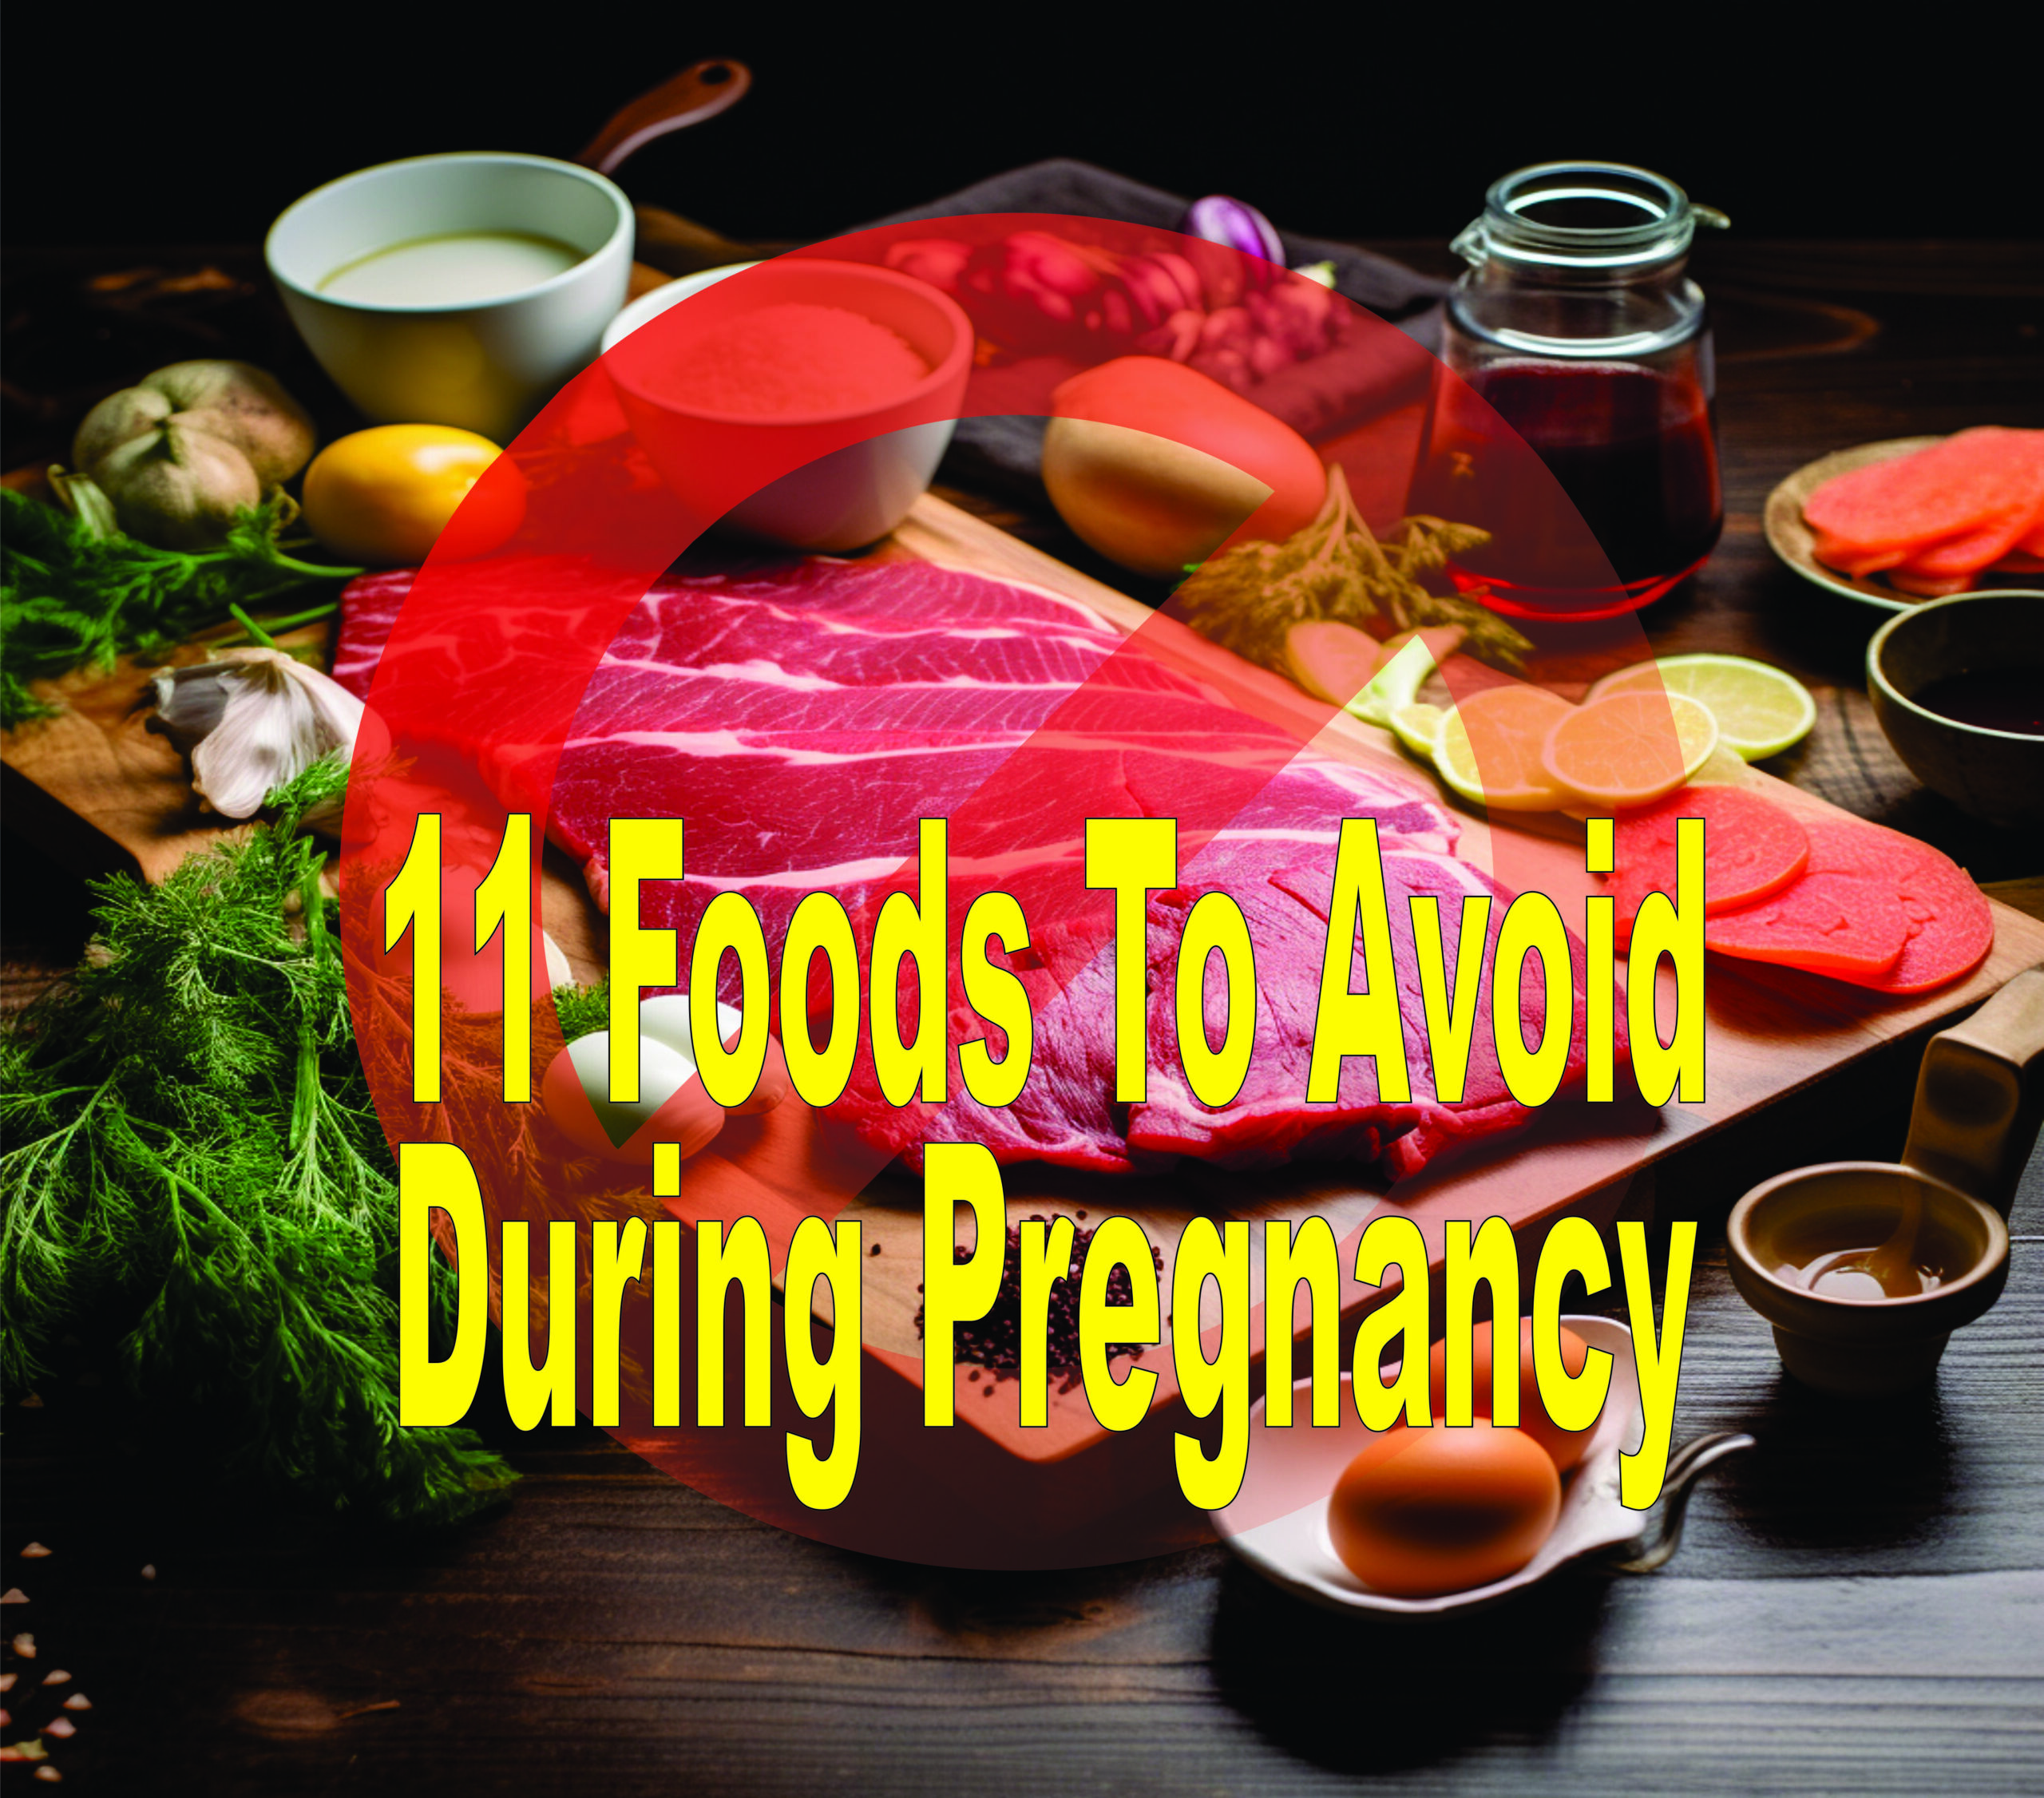 11 Foods To Avoid During Pregnancy